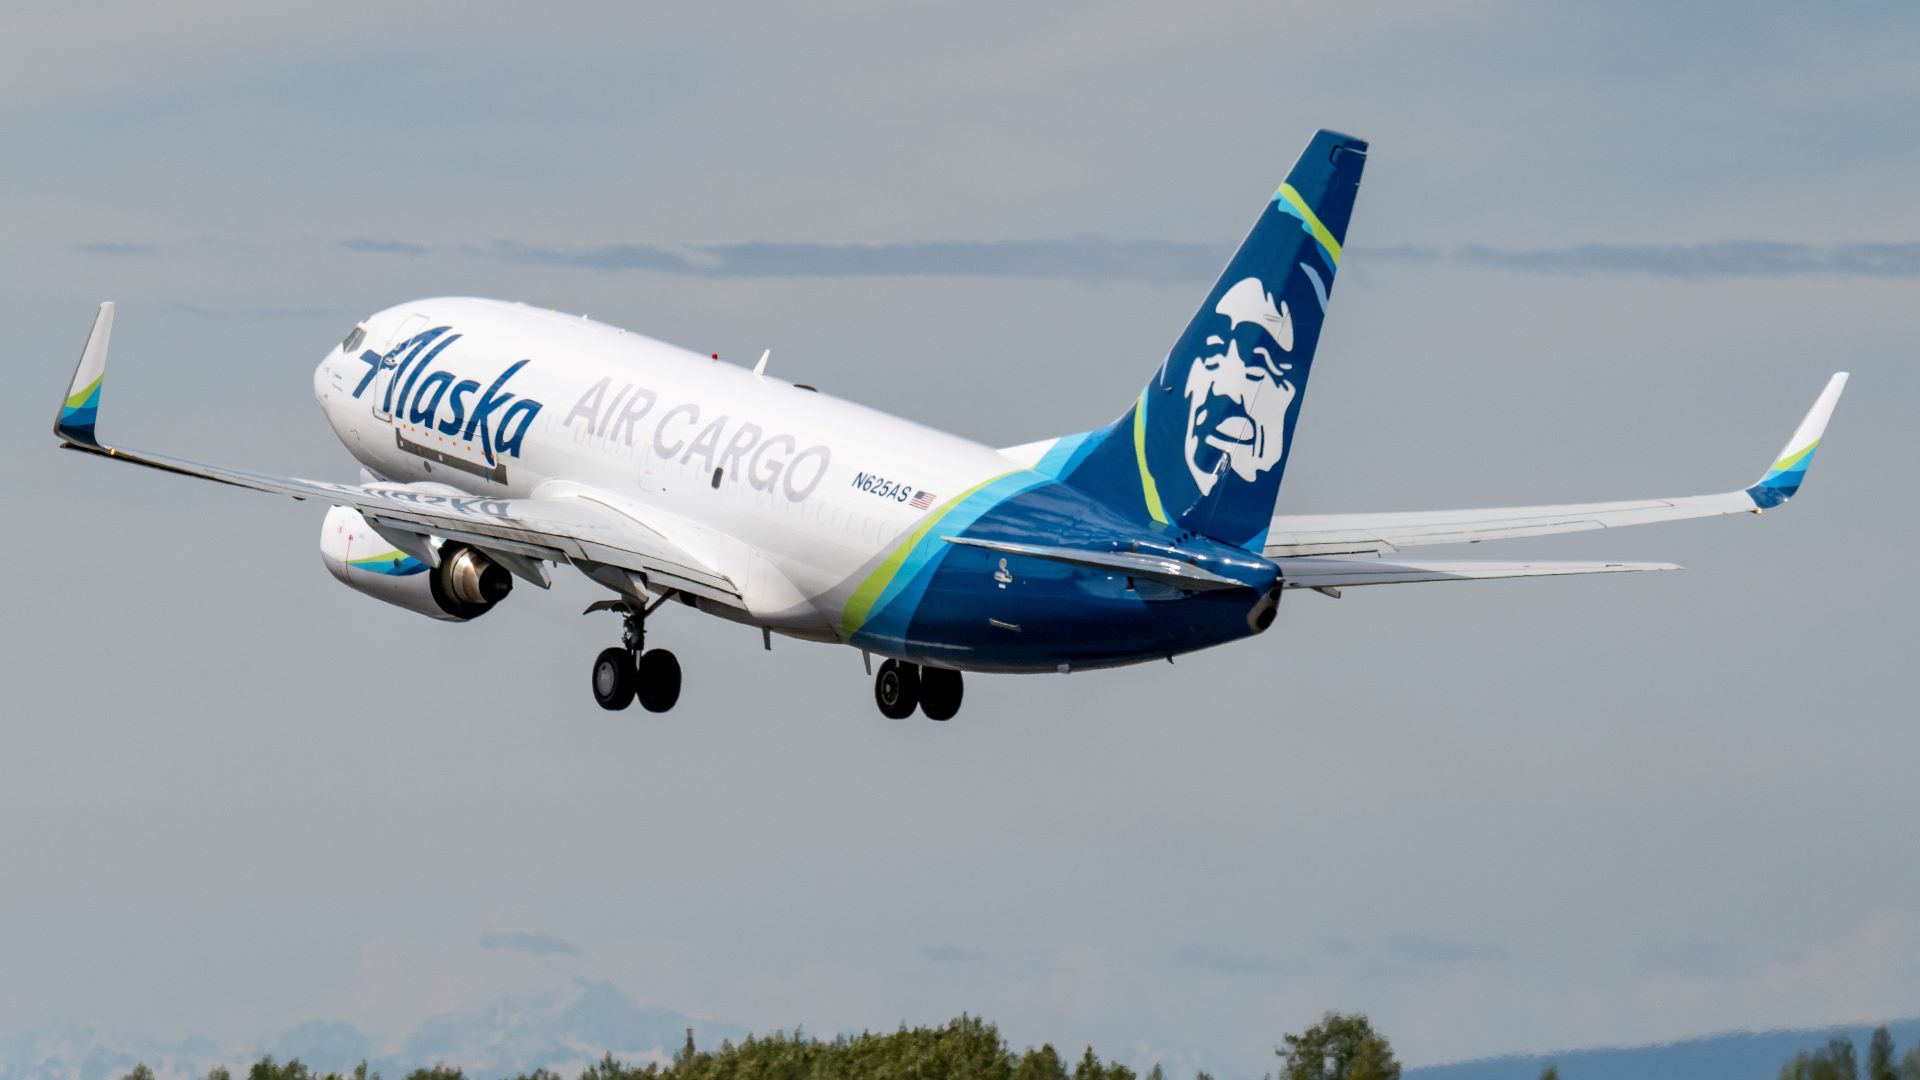 A white Alaska Airlines Cargo jet with blue tail and Eskimo image takes off, rear view.